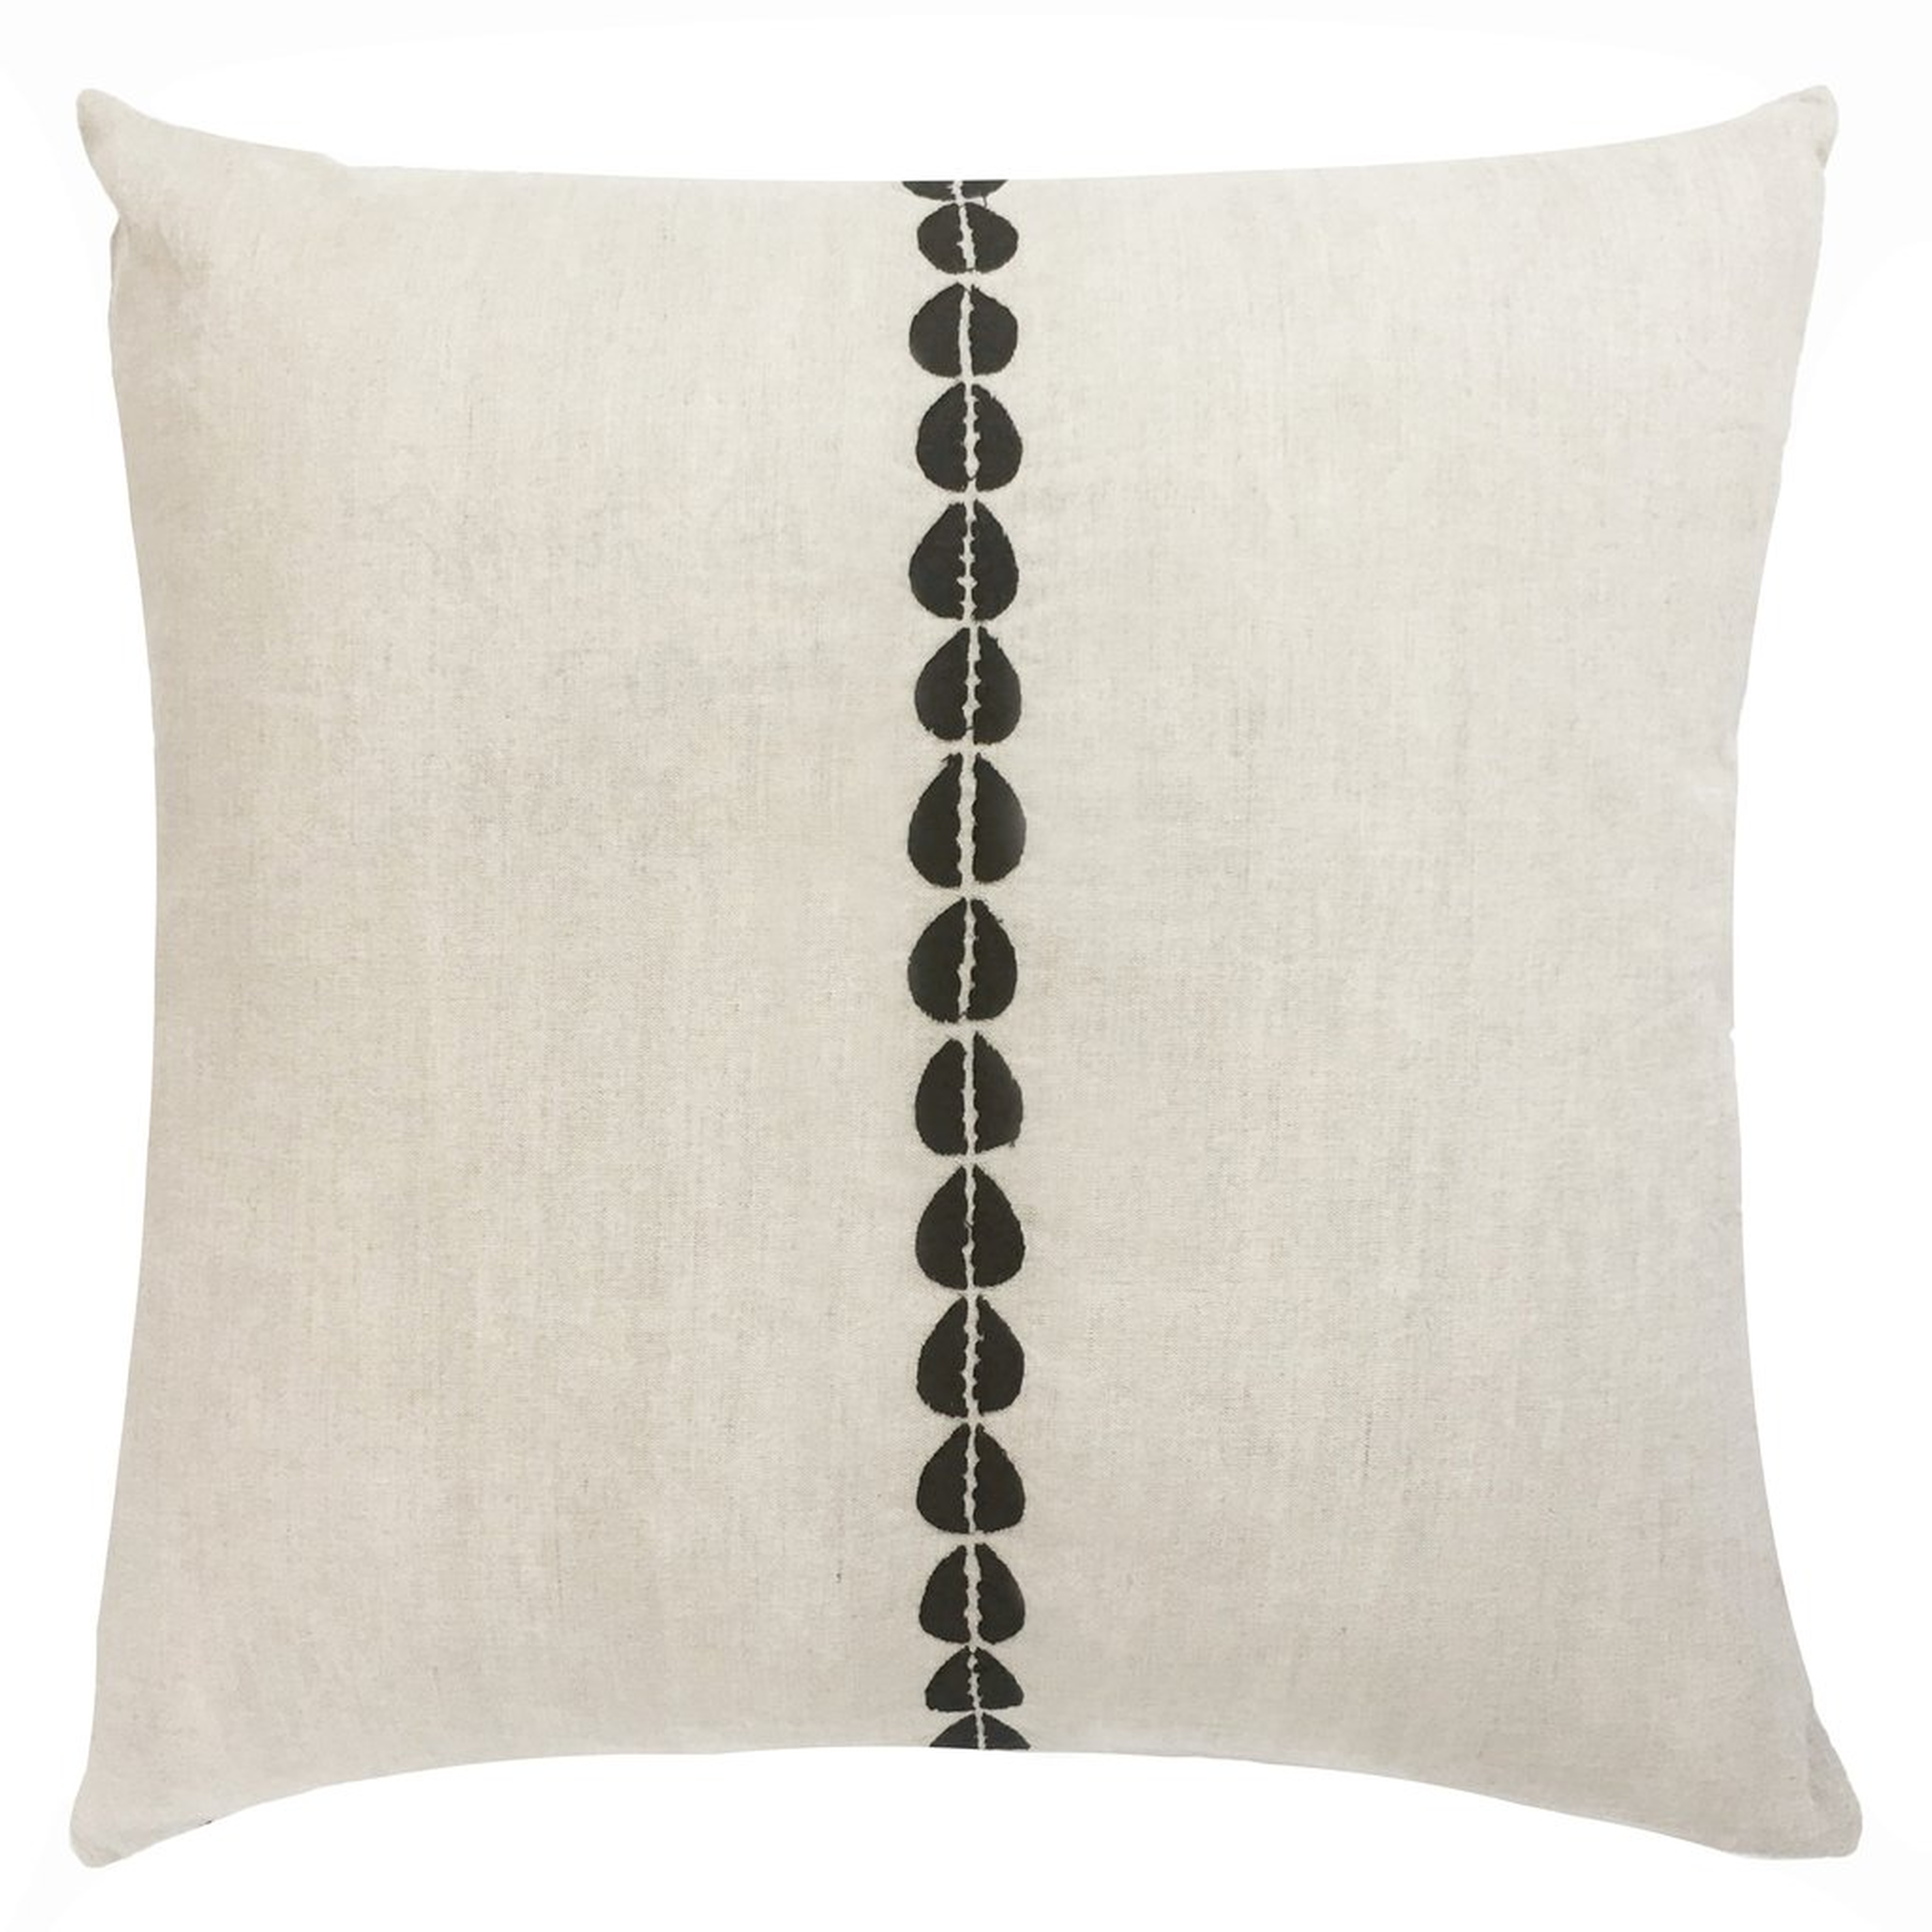 COWRIE EMBROIDERED PILLOW IN NATURAL AND BLACK - PillowPia